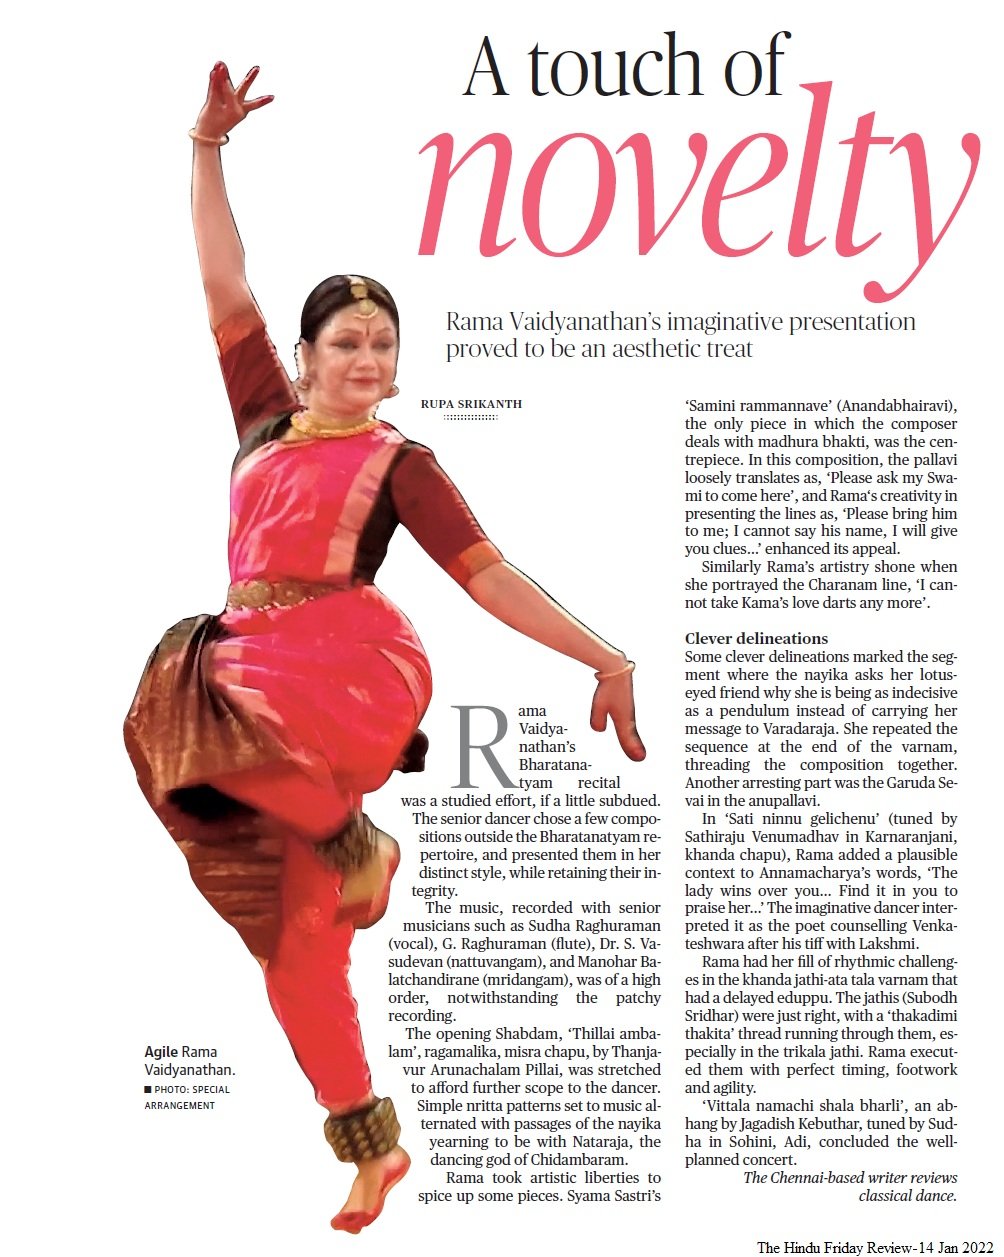 A touch of novelty - Rupa Srikanth